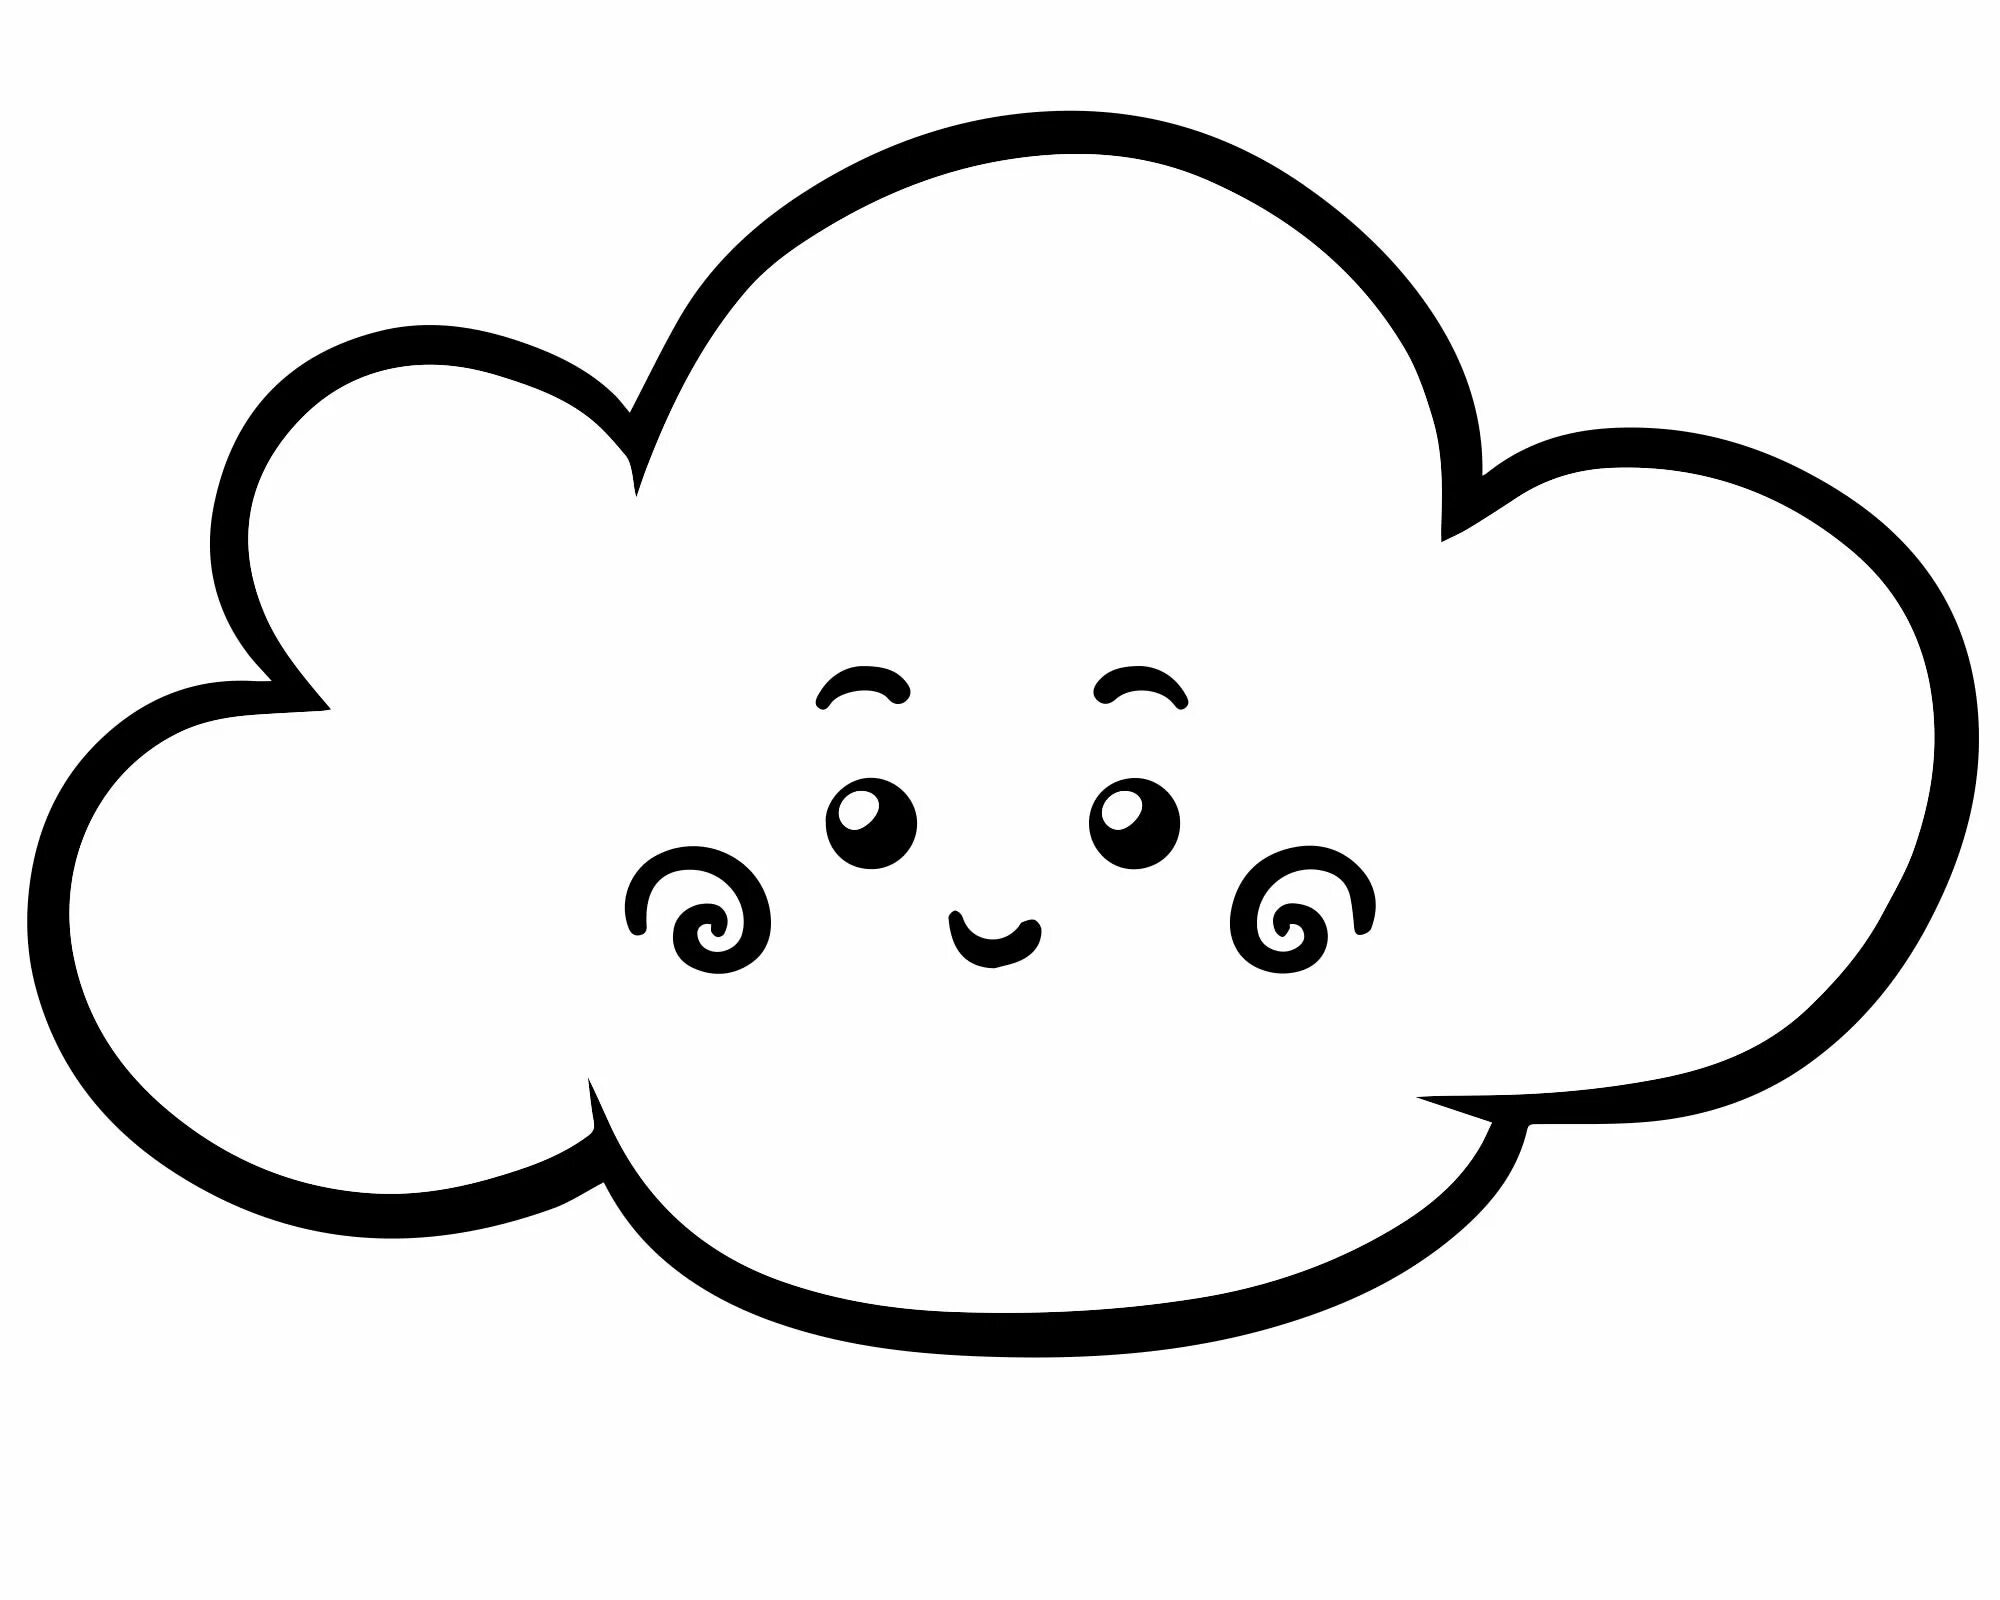 Exquisite cloud coloring book for kids